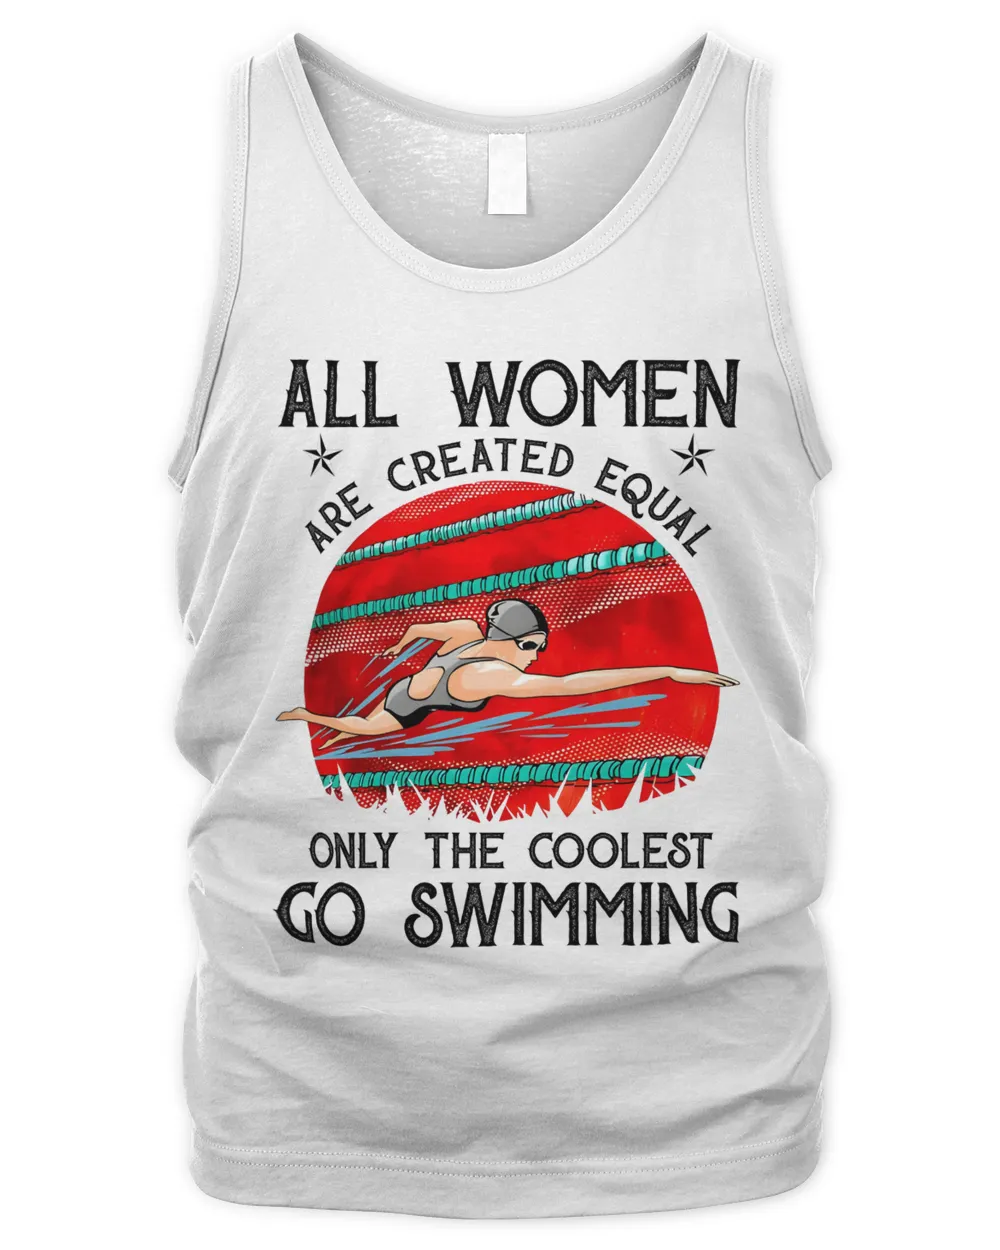 All women are created equal only the coolest go swimming